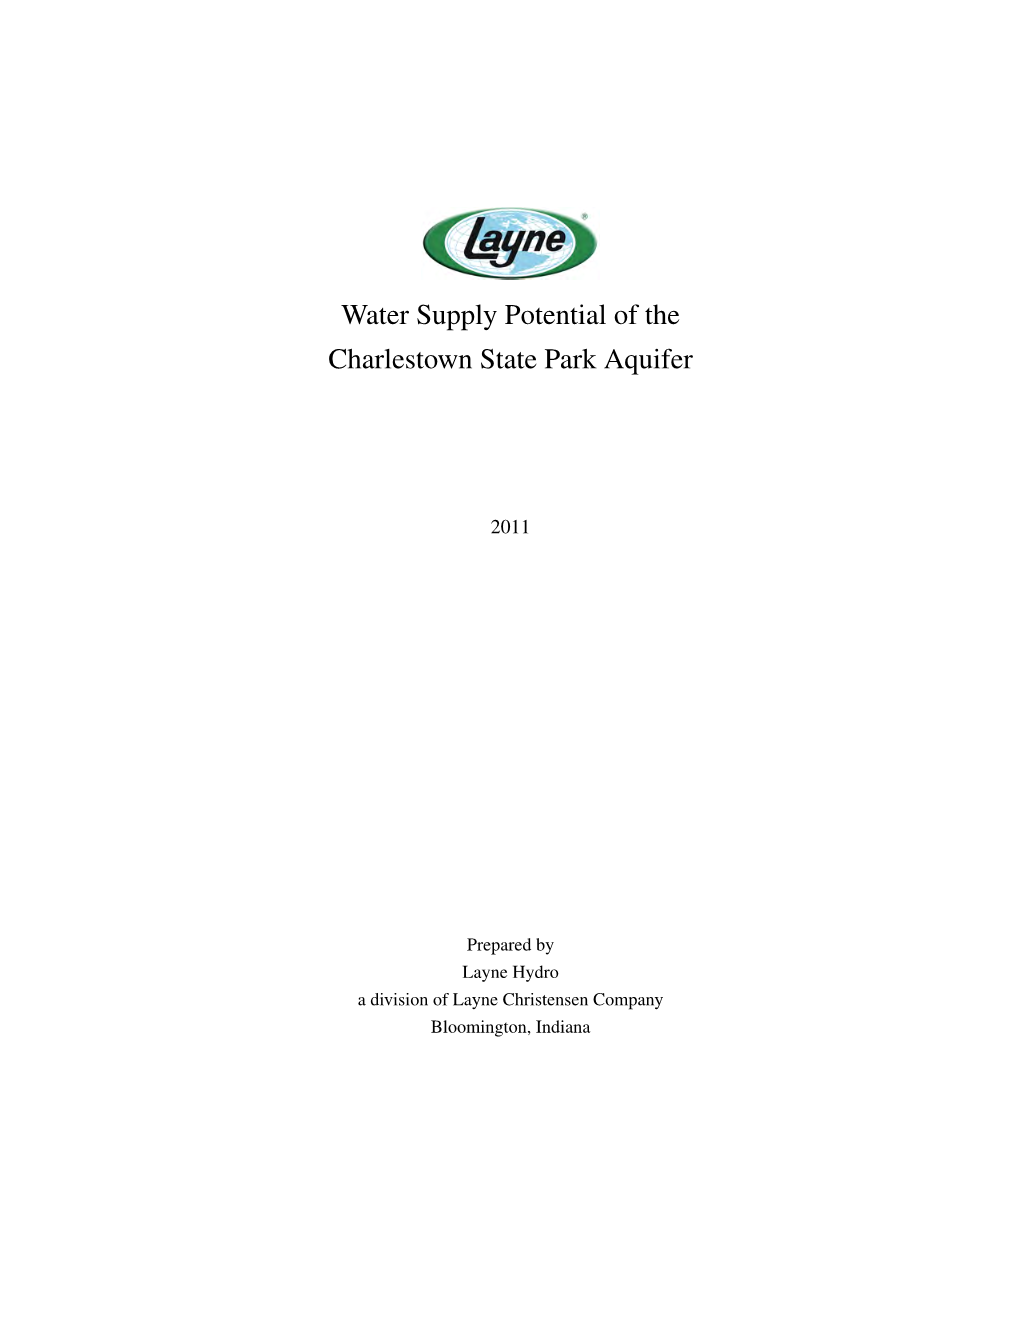 Water Supply Potential of the Charlestown State Park Aquifer